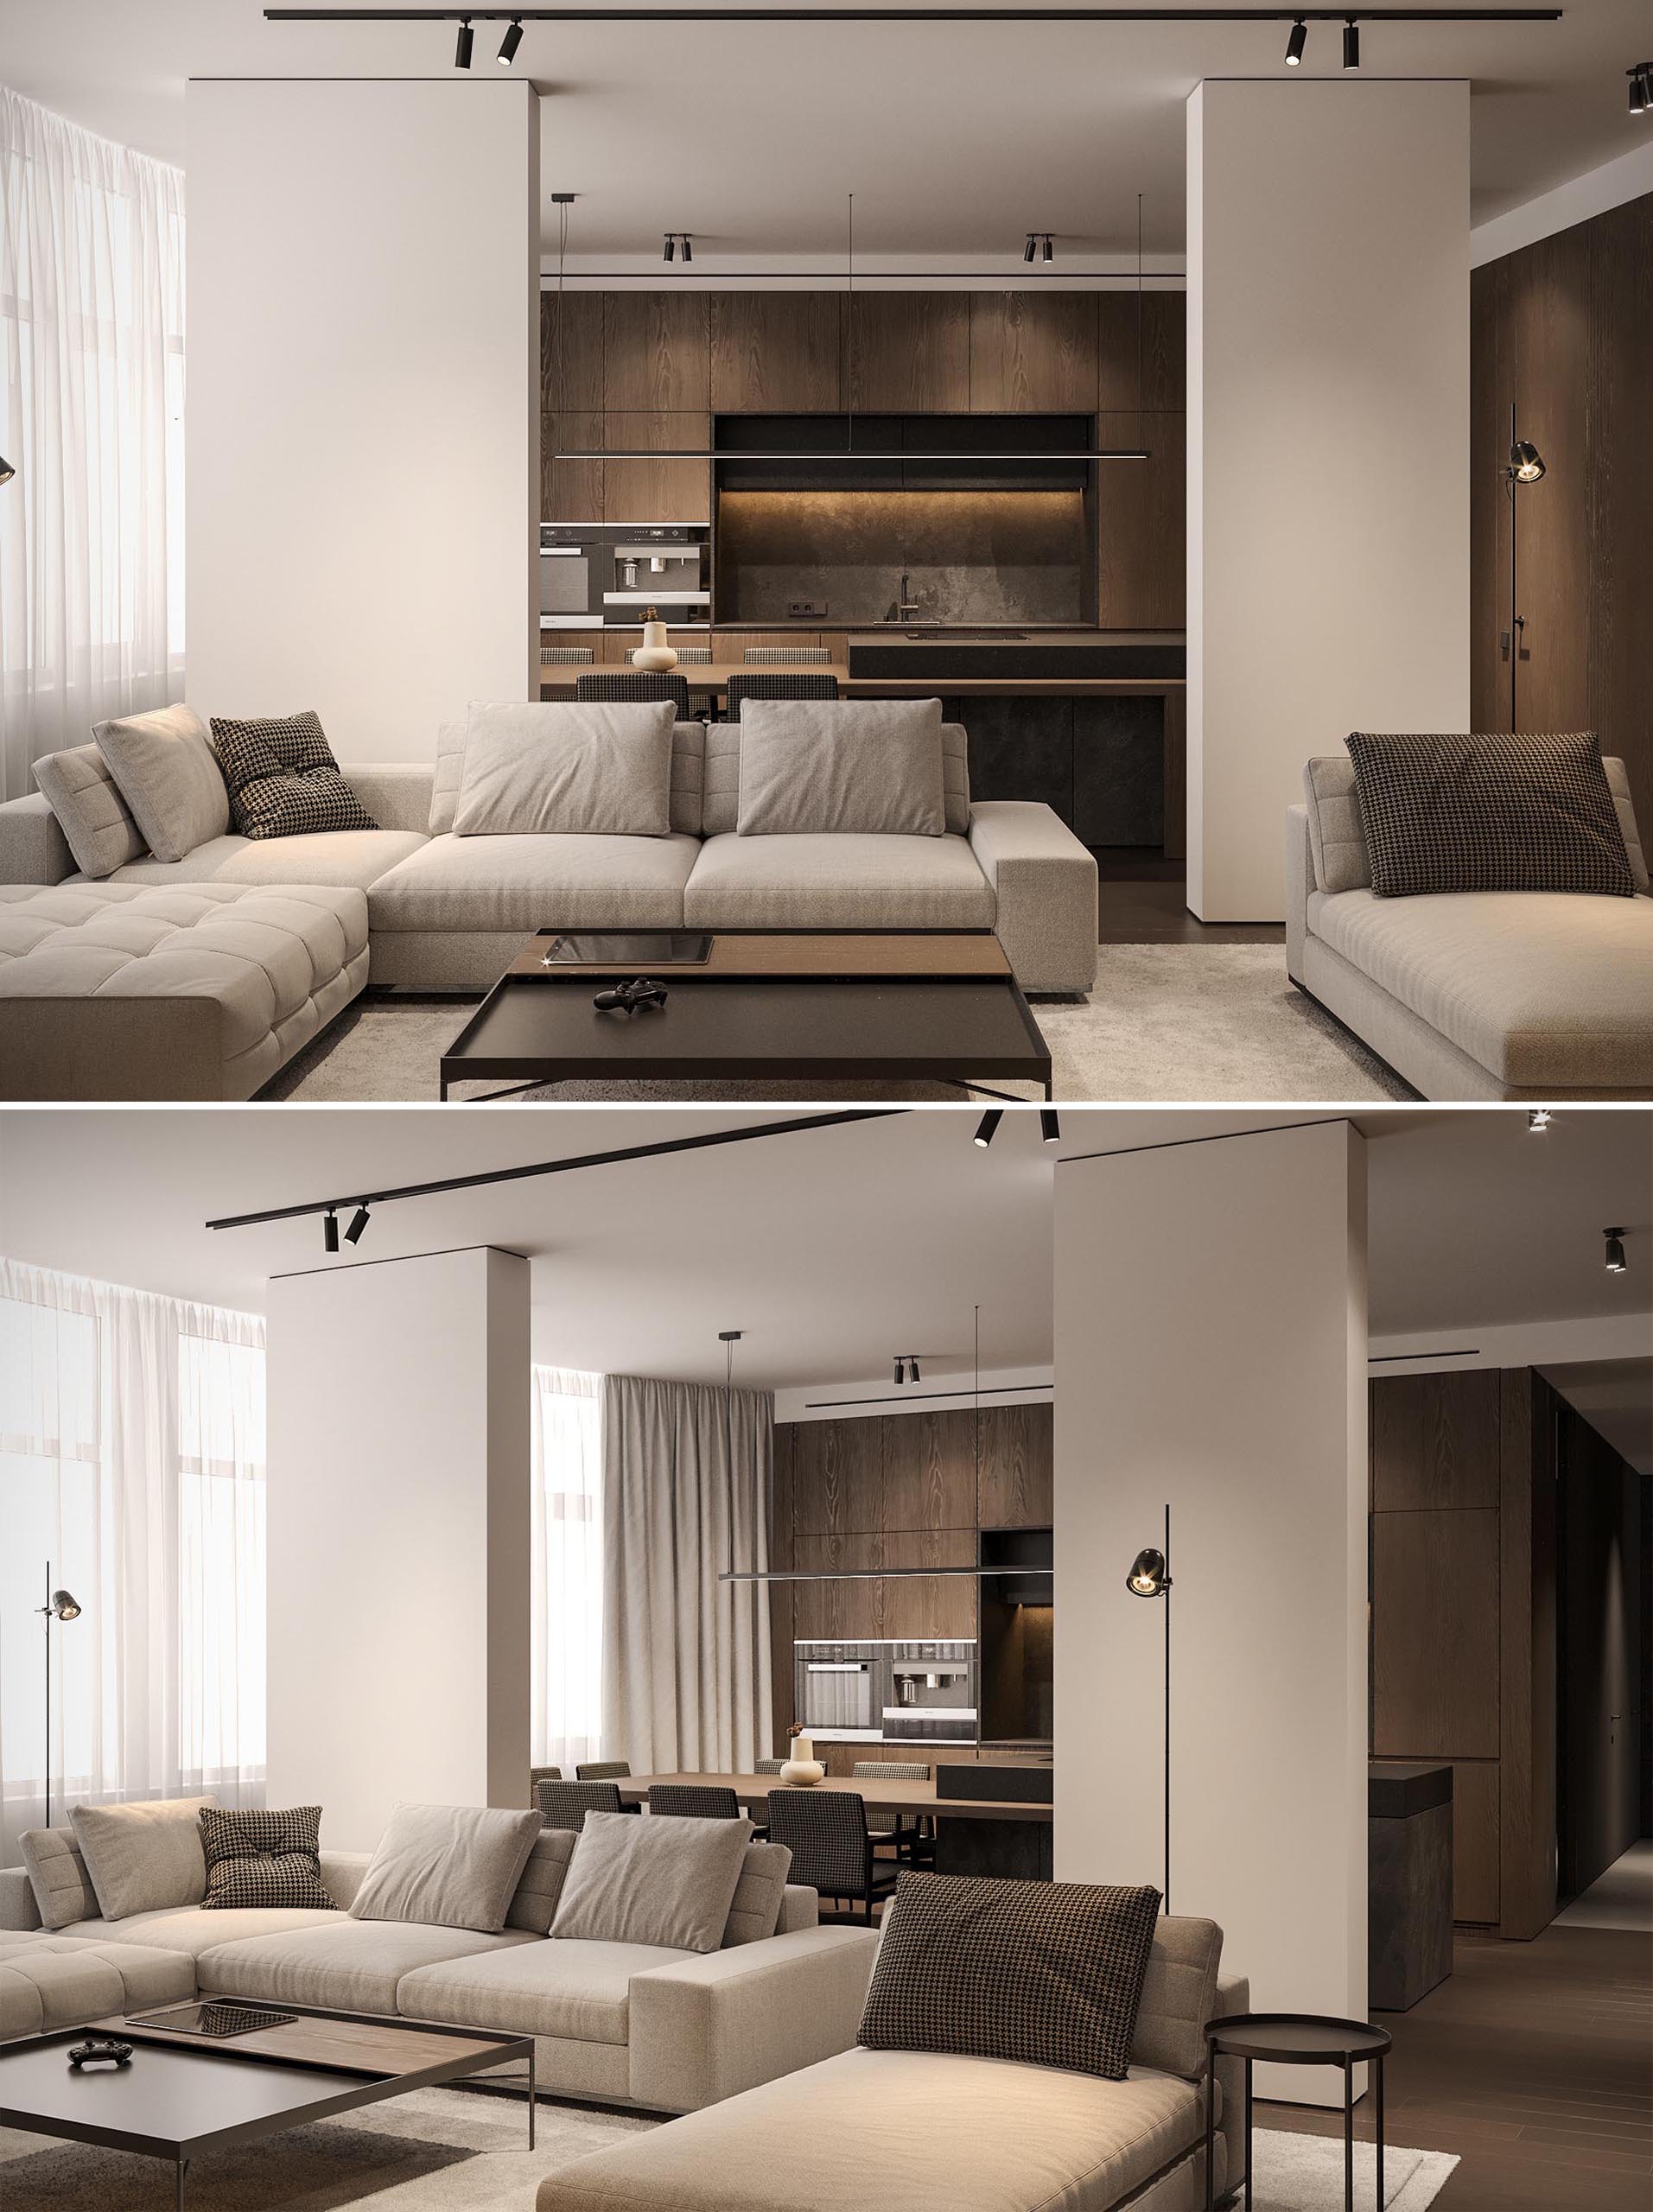 In this modern living room, modular furniture creates multiple seating areas, and the TV shelf is highlighted by lighting, similar to that in the bedrooms.